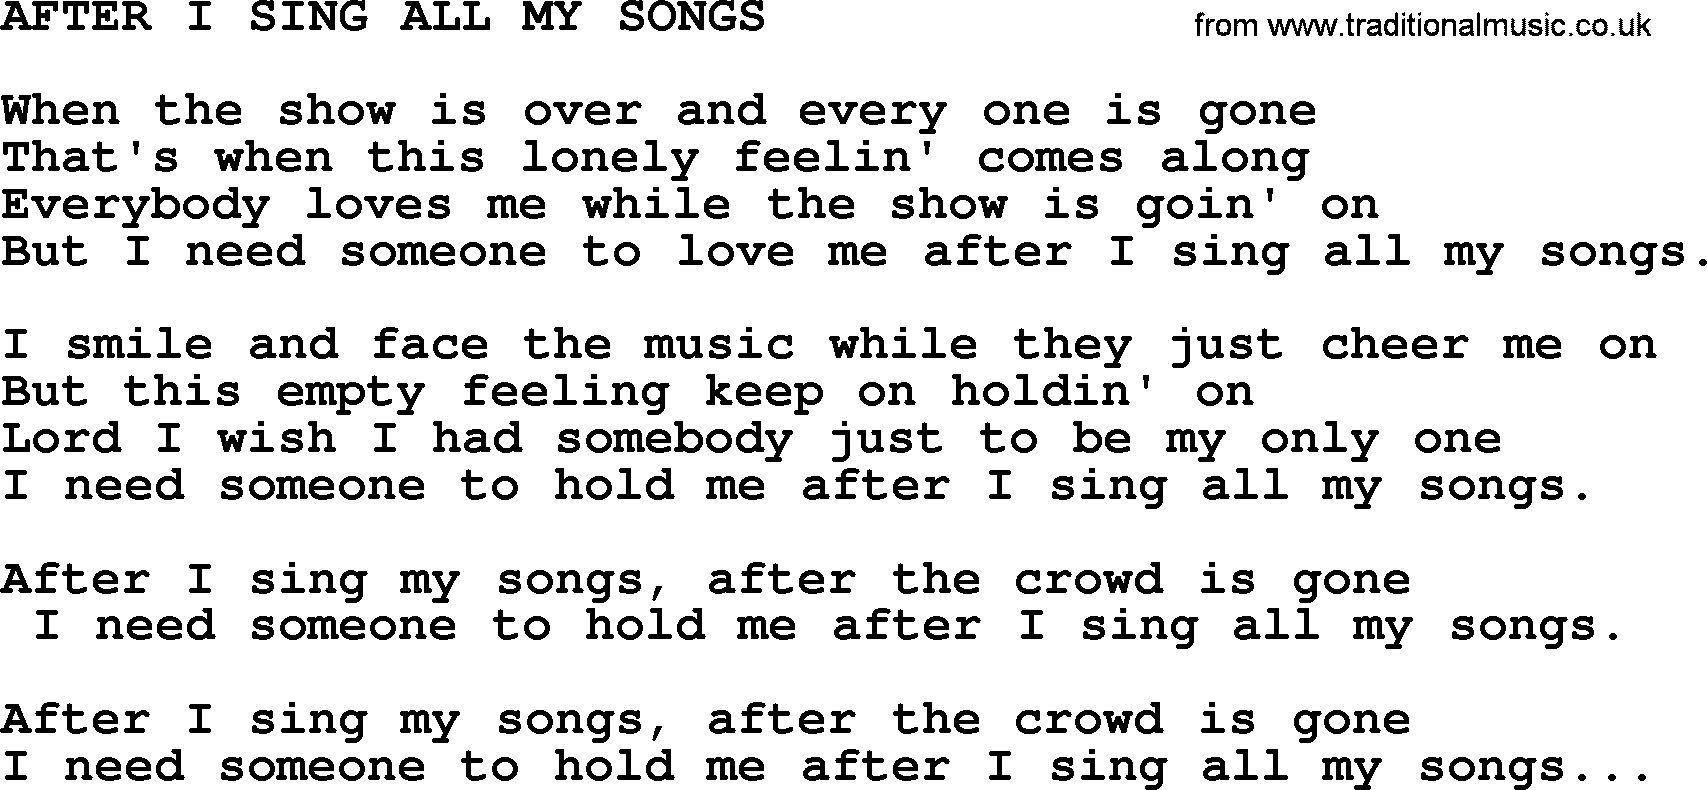 Merle Haggard song: After I Sing All My Songs, lyrics.